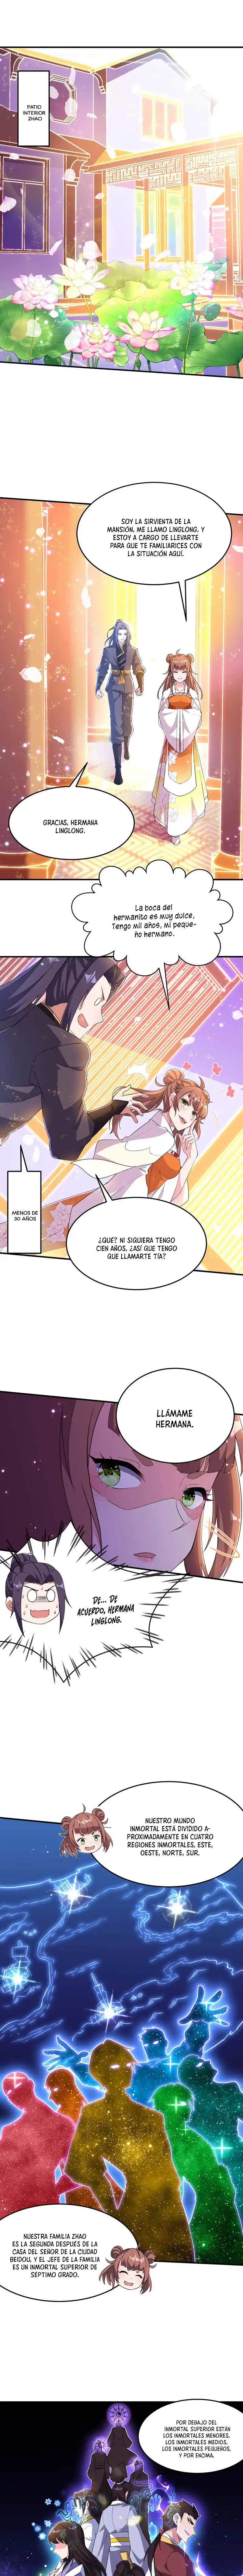 Primer Yerno: Chapter 229 - Page 1